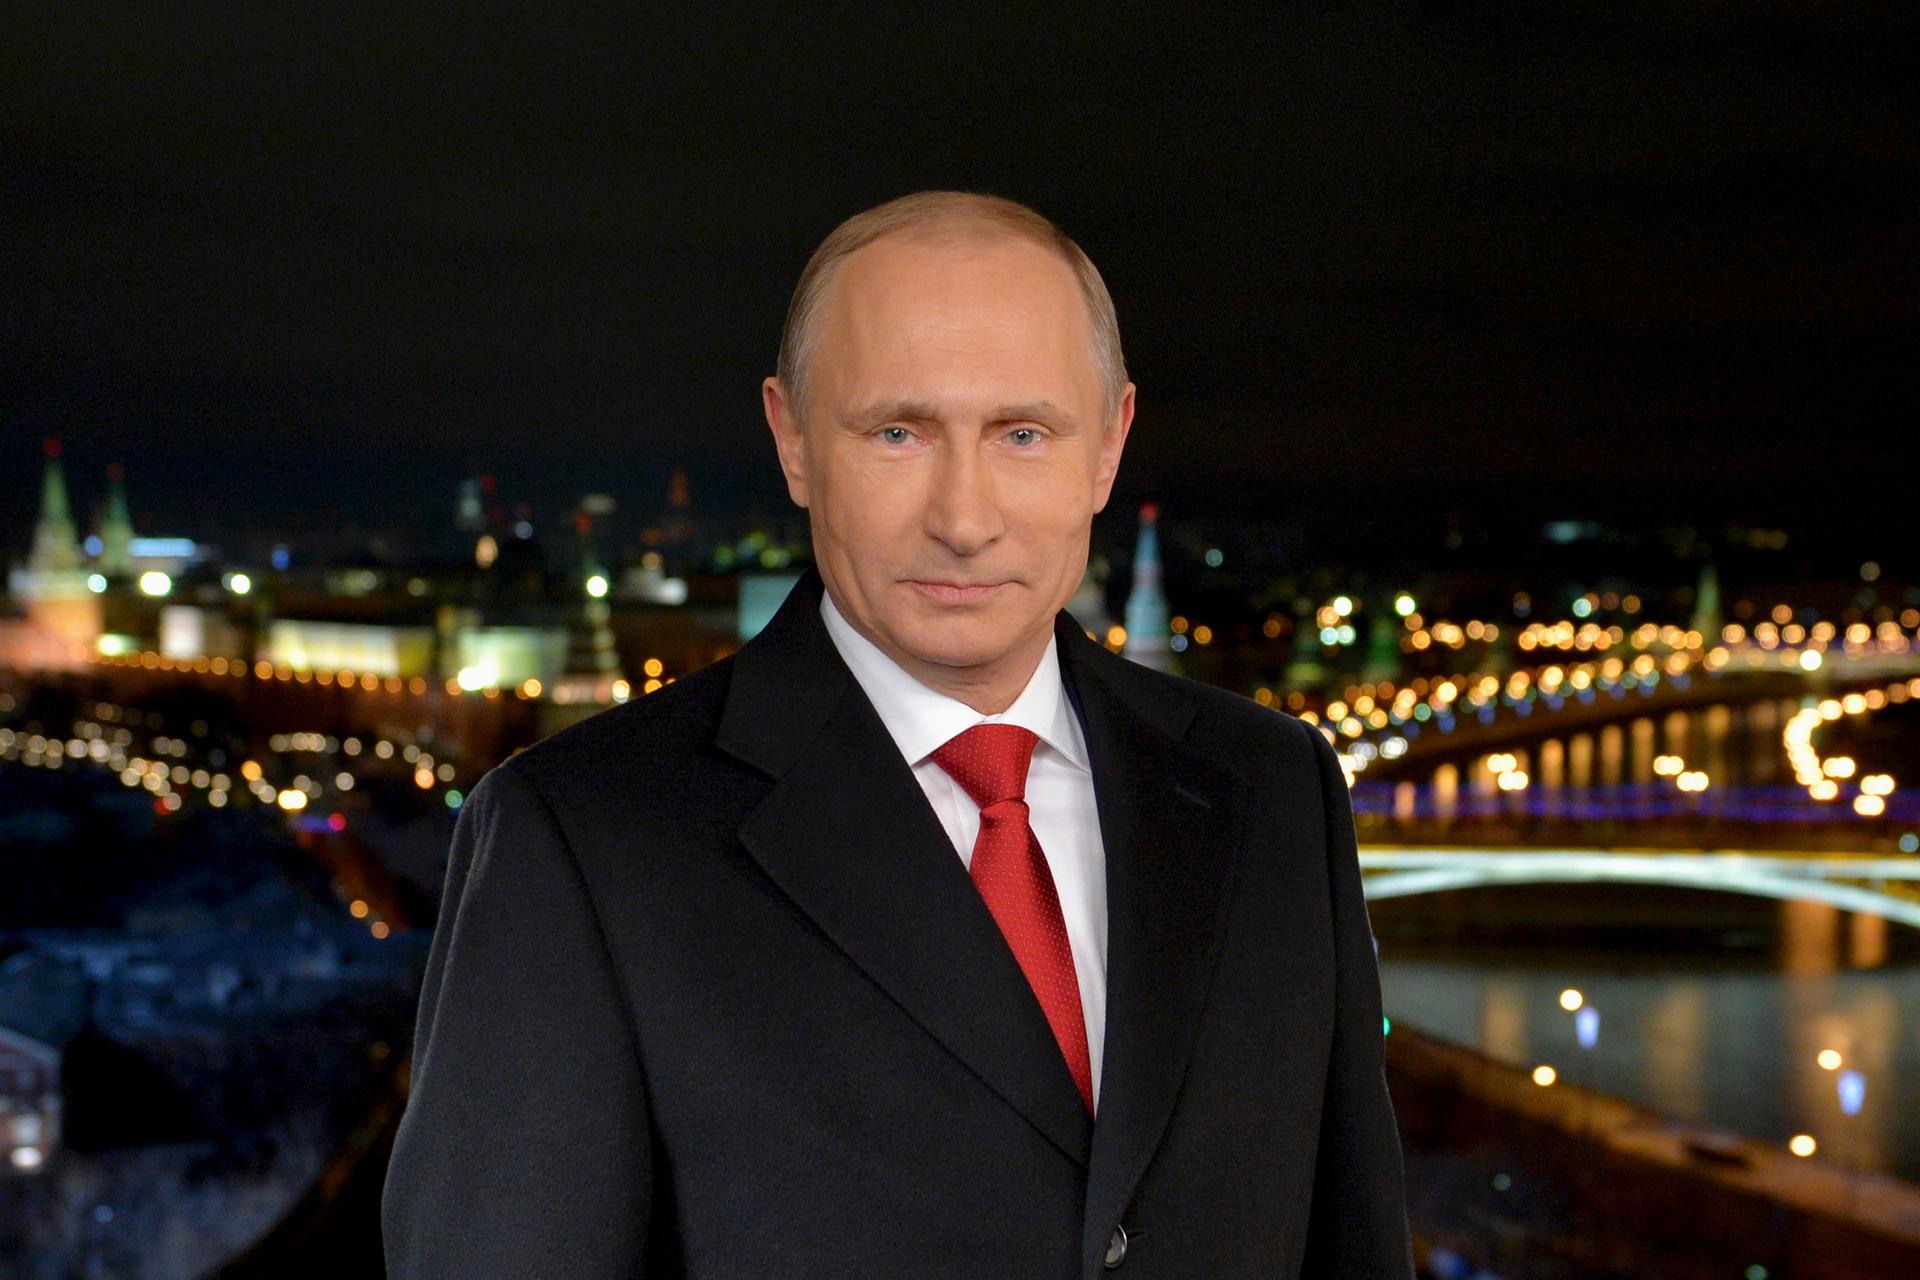 Russia's President Vladimir Putin makes his annual New Year address to the nation in Moscow December 31, 2014.